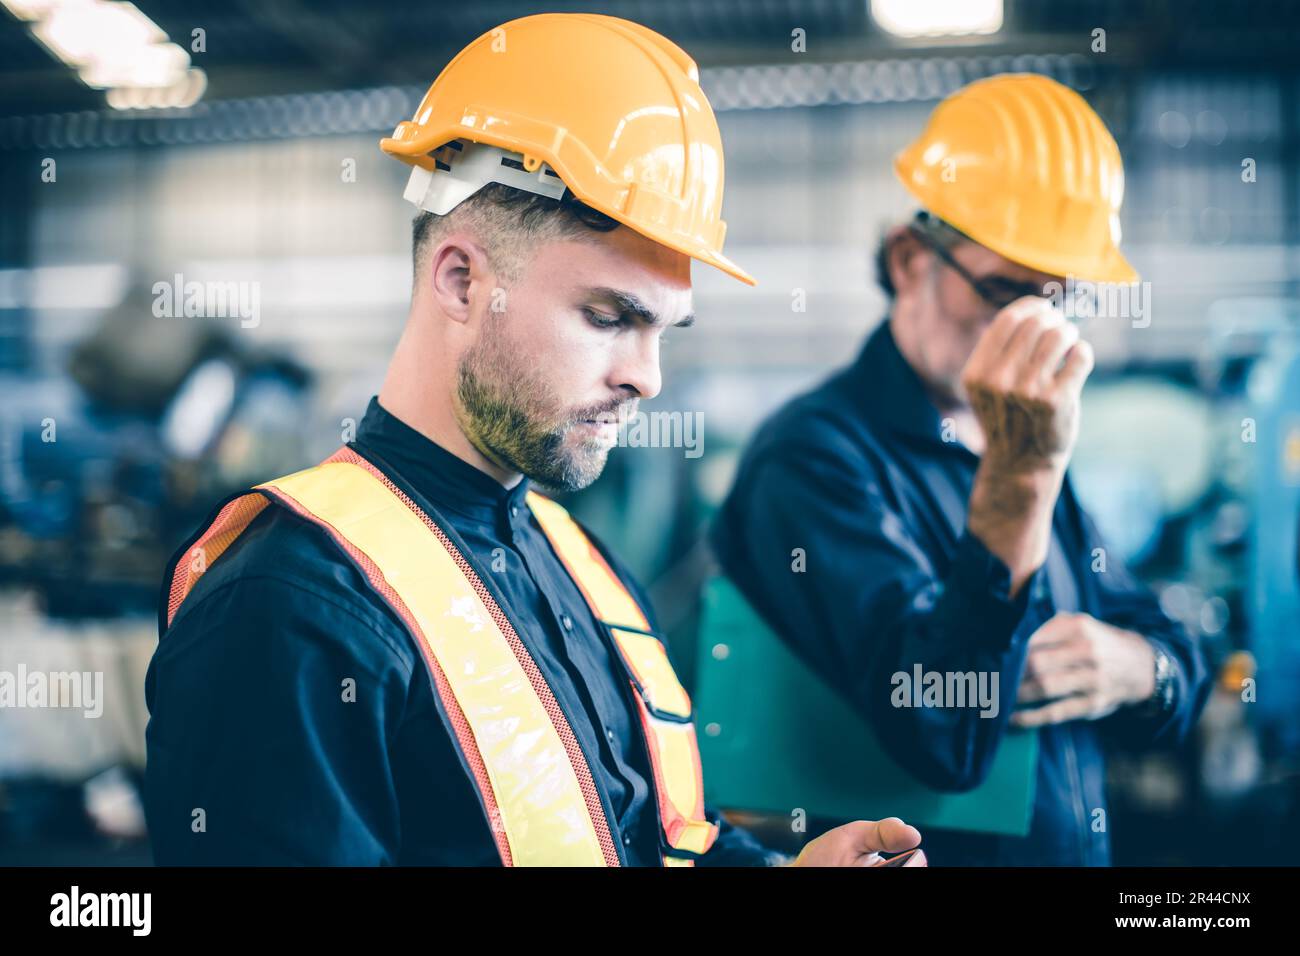 engineer male young worker teamwork working together in heavy industry with safety suit hard hat helmet Stock Photo